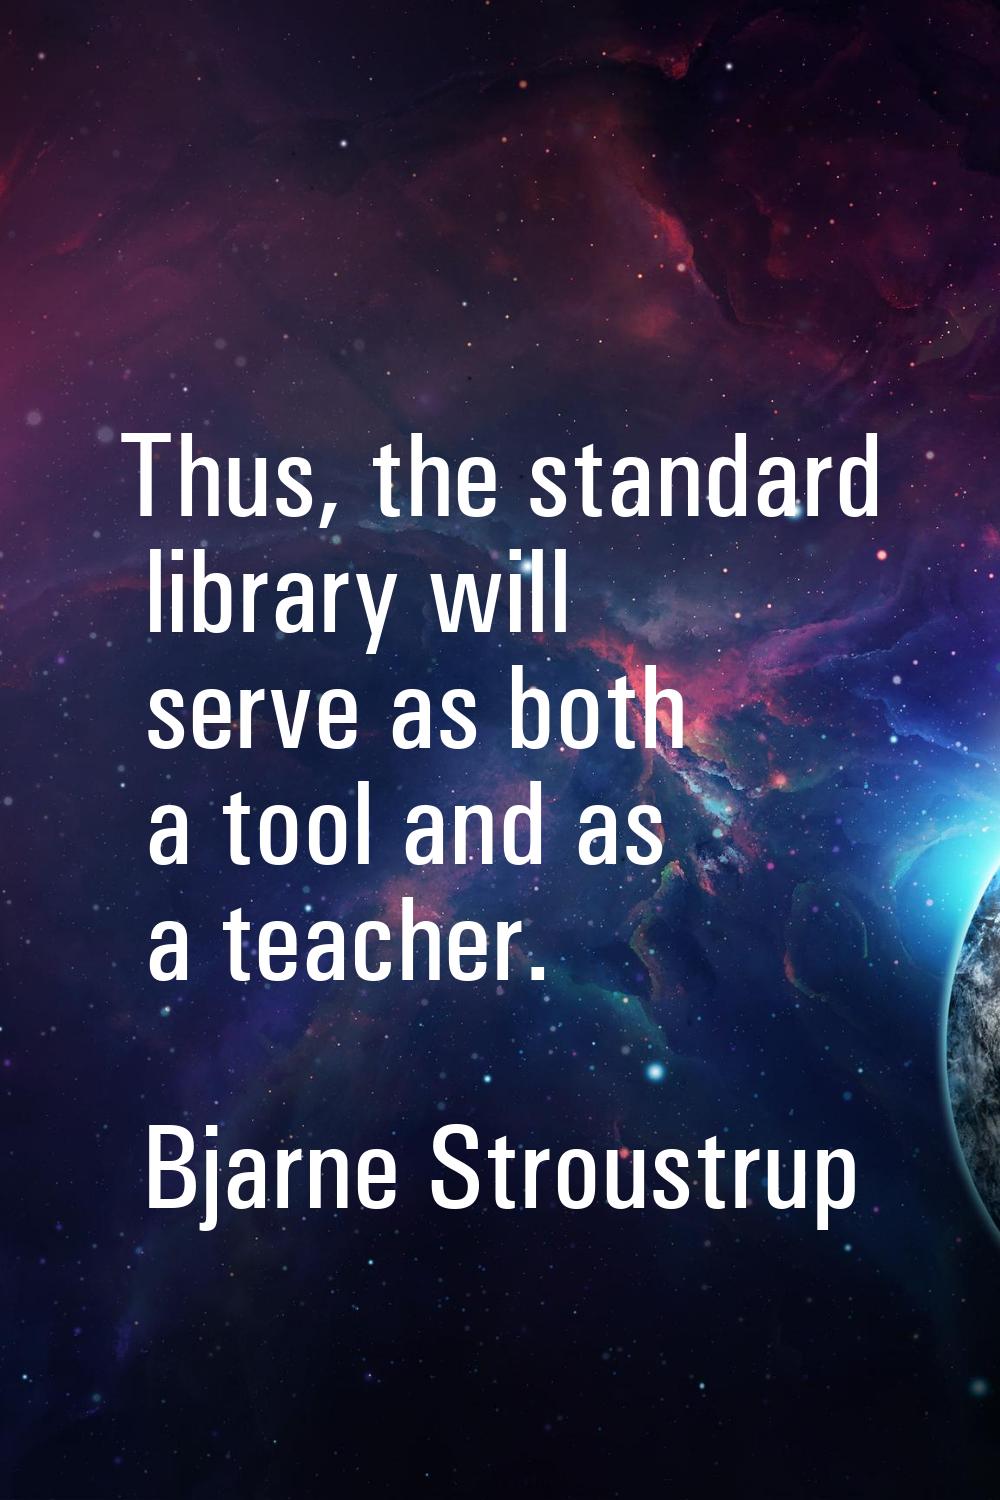 Thus, the standard library will serve as both a tool and as a teacher.